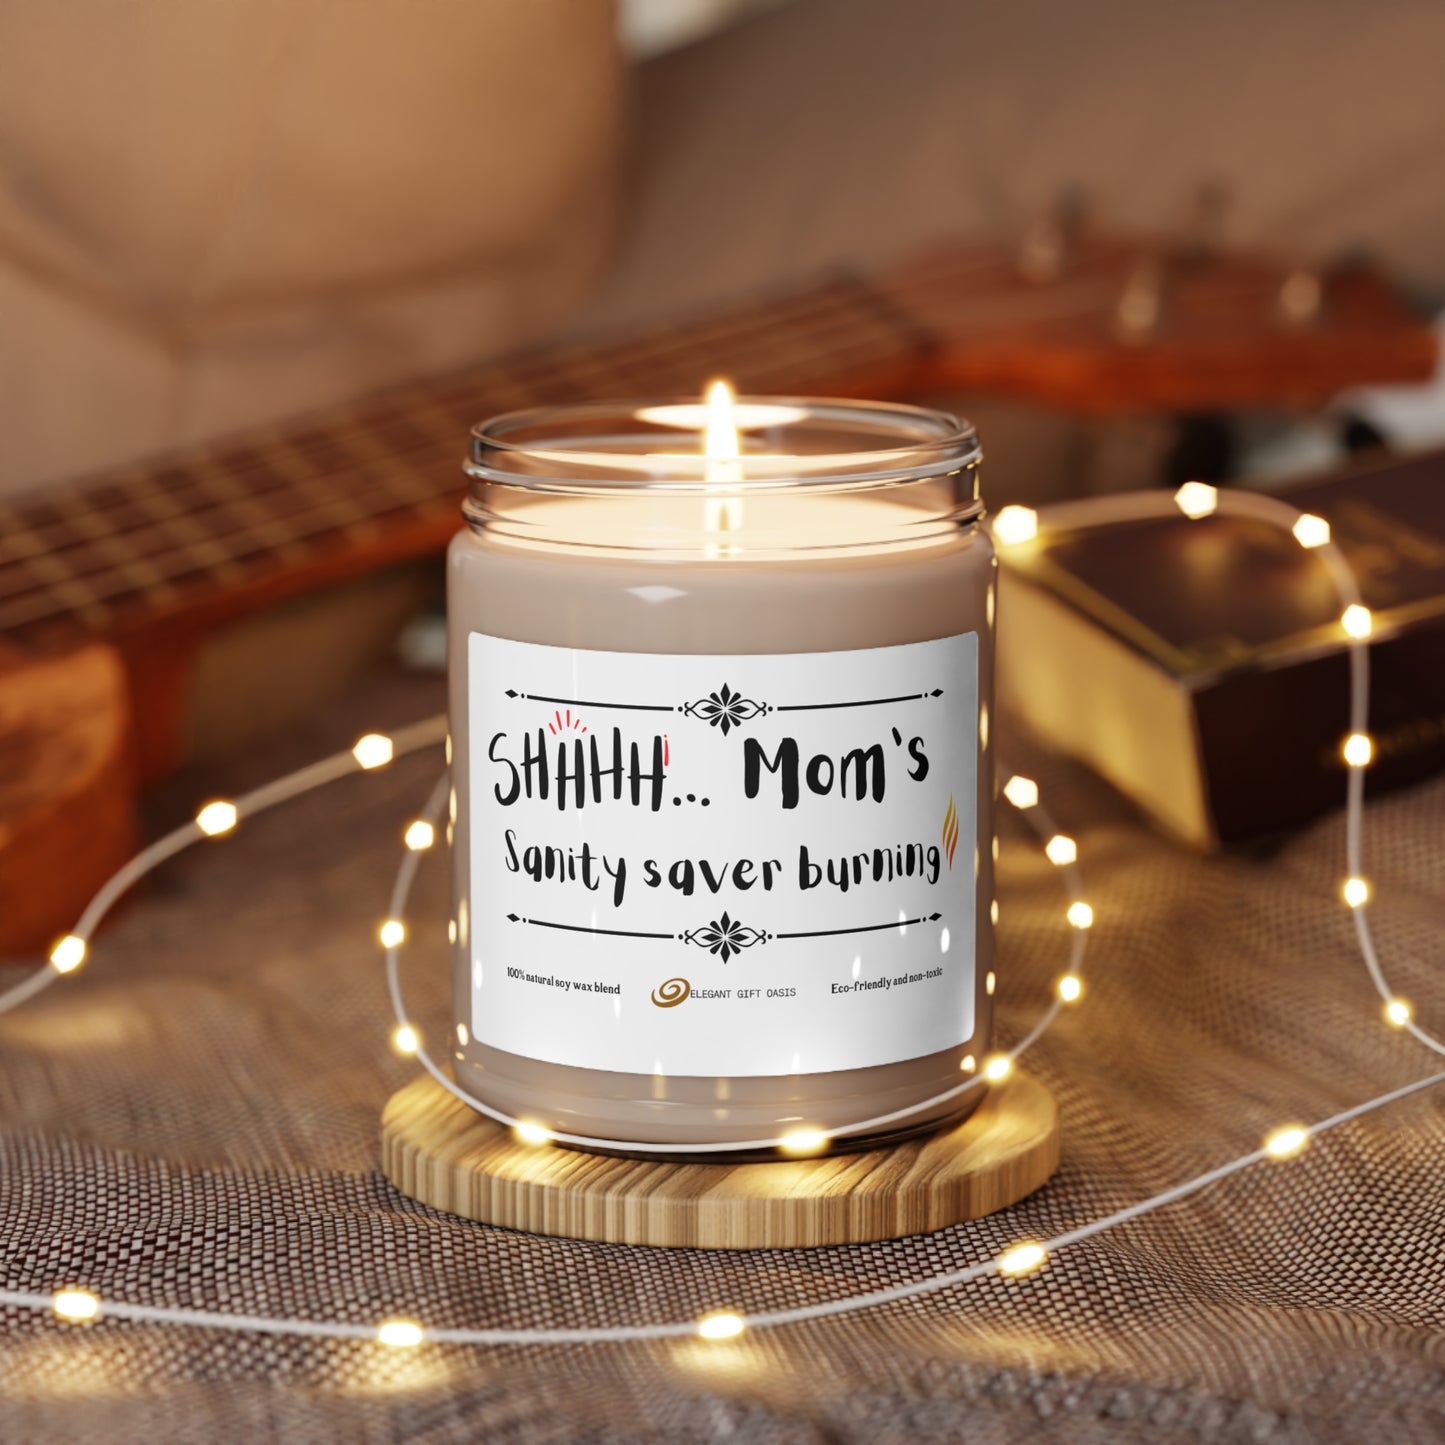 Shhhh! Mom's sanity saver burning! - Scented Soy Candle, 9oz